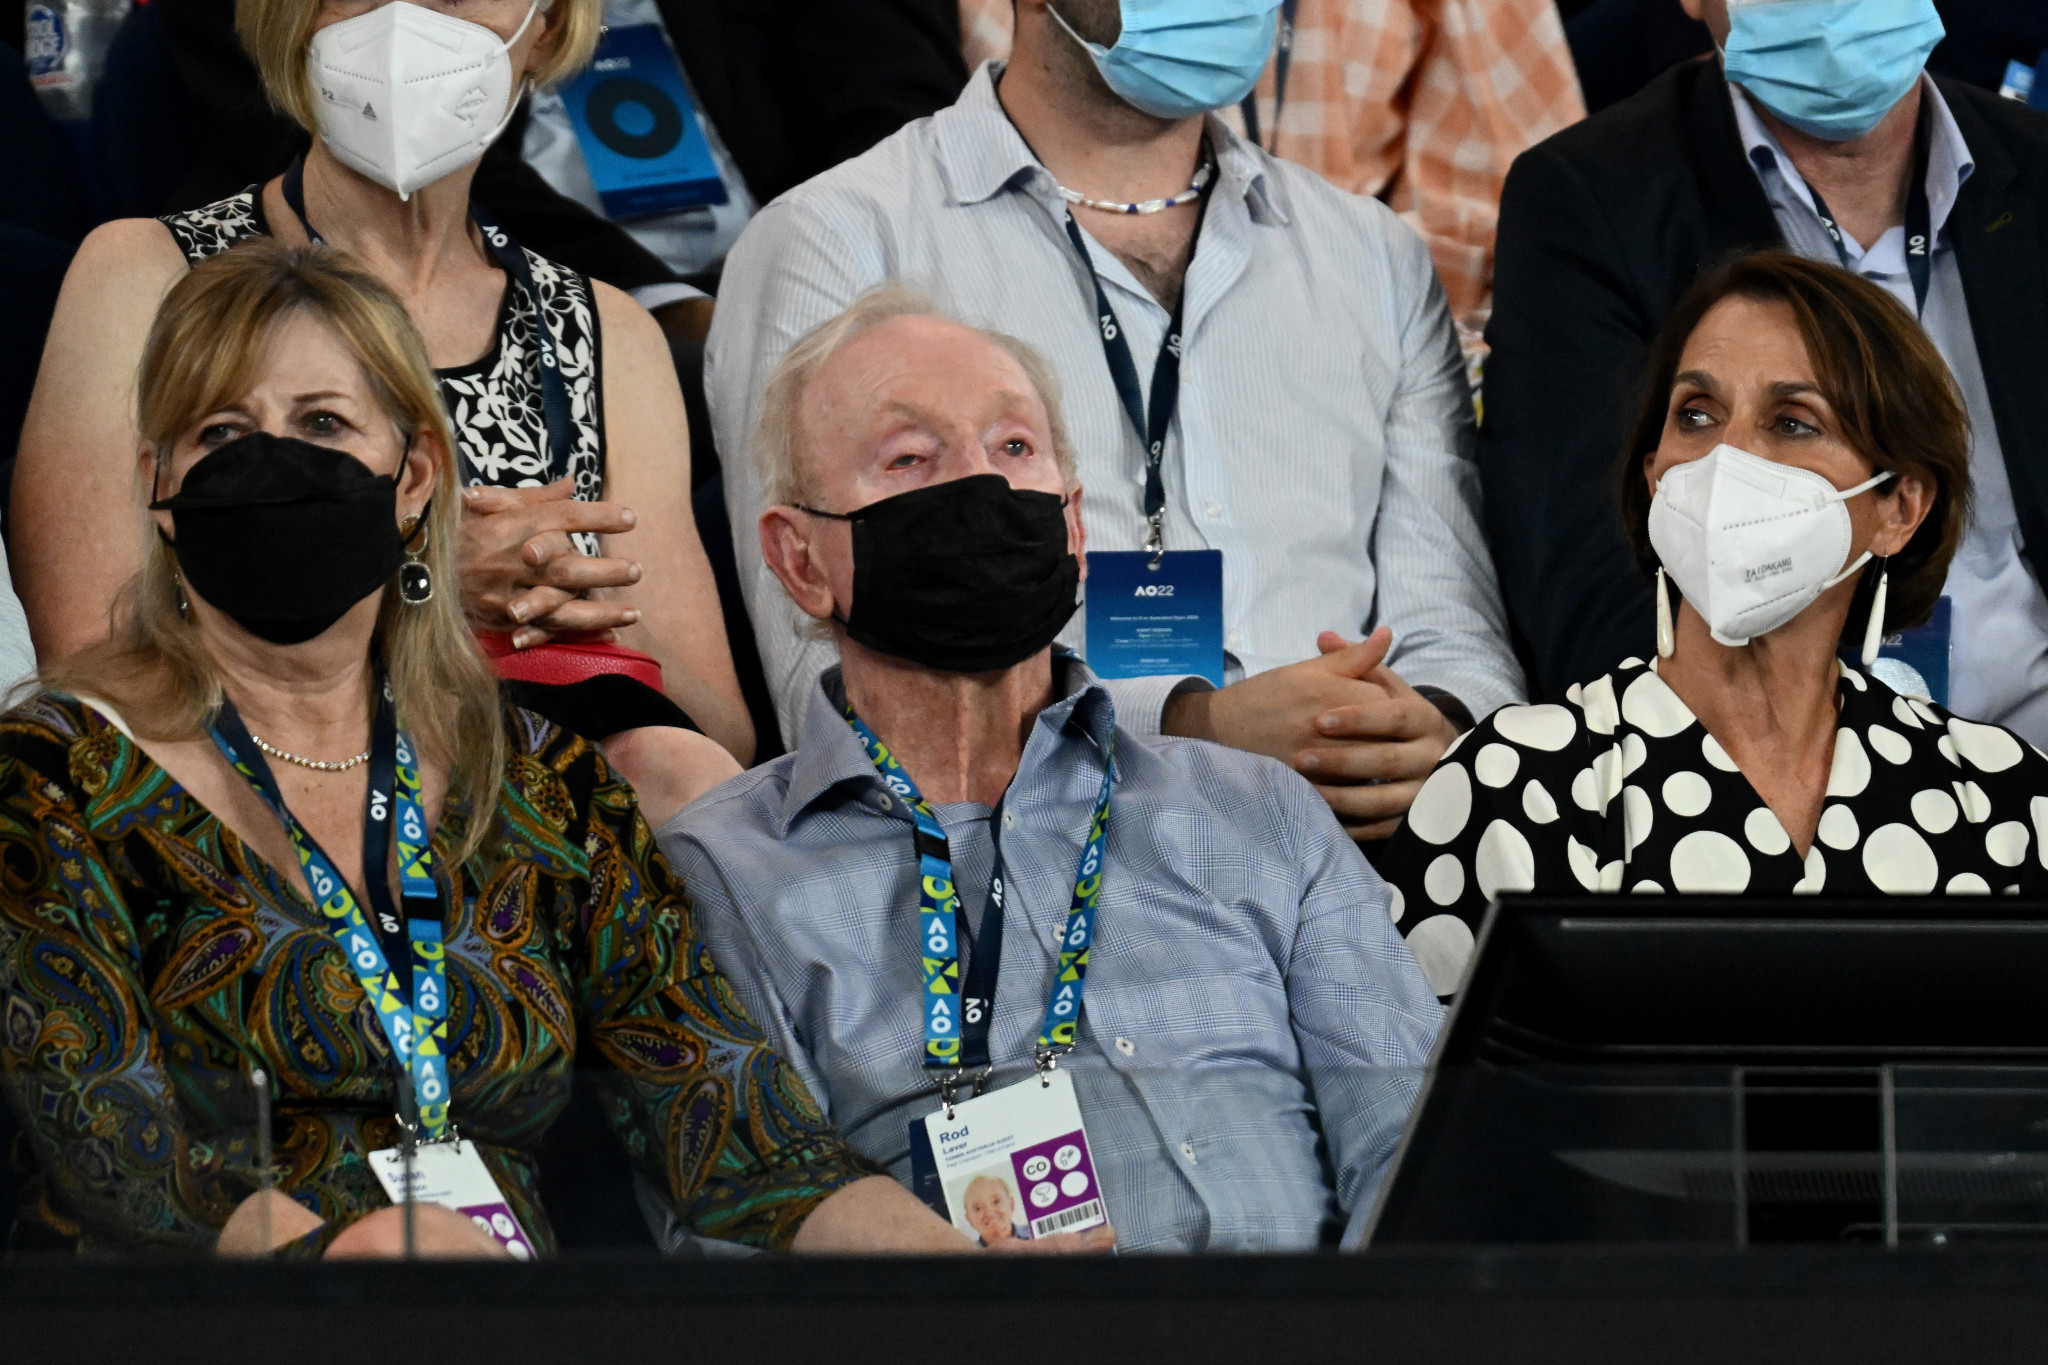 Rod Laver watches the men's singles action unfold on the court named after him ©Getty Images